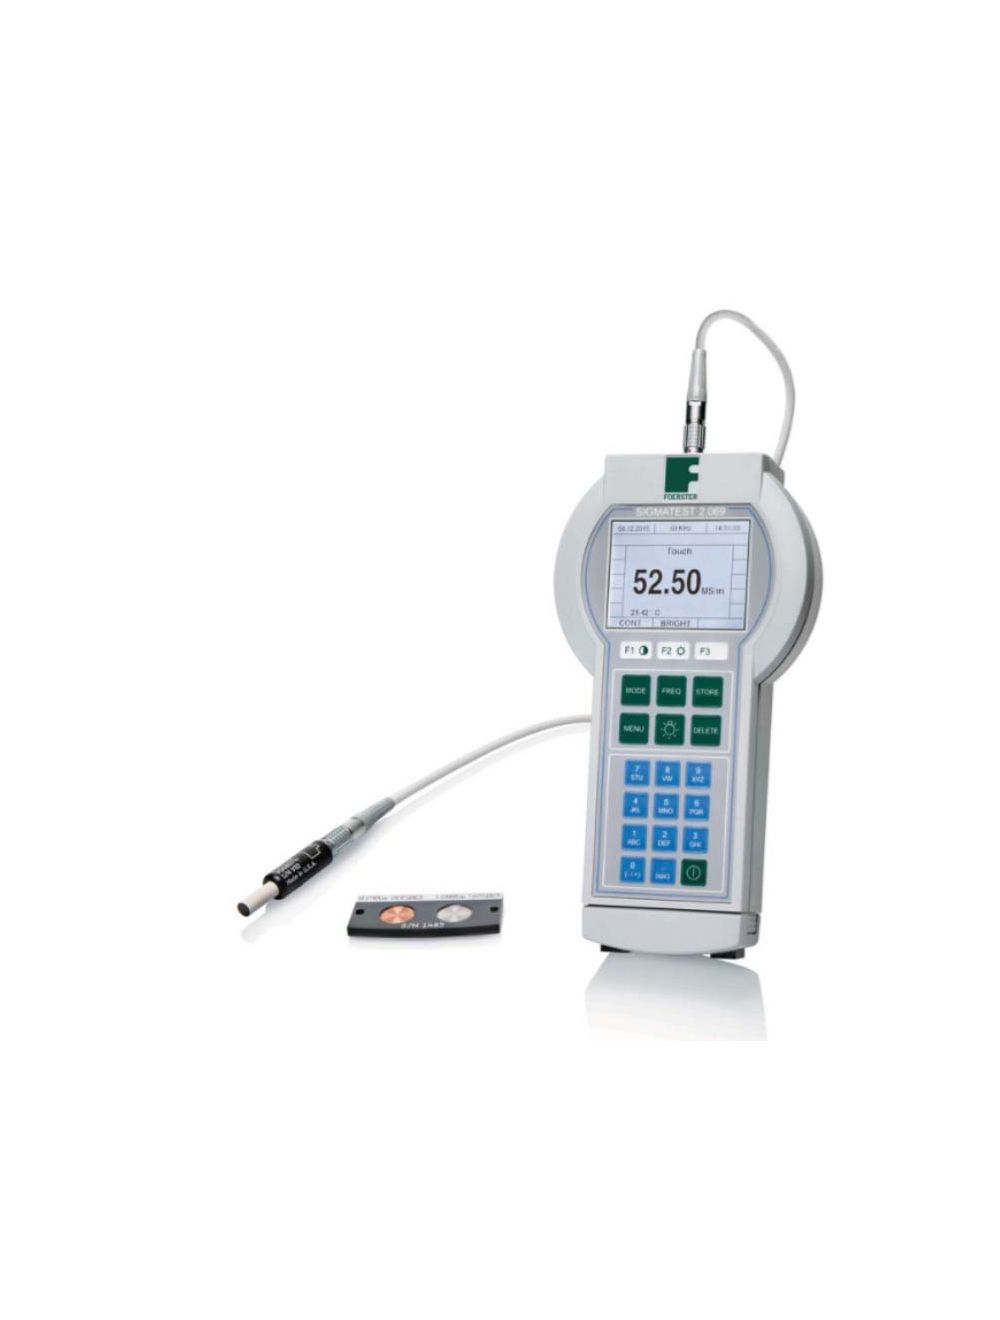 New In stock for sale, Foerster Conductivity Meter SIGMATEST2.069